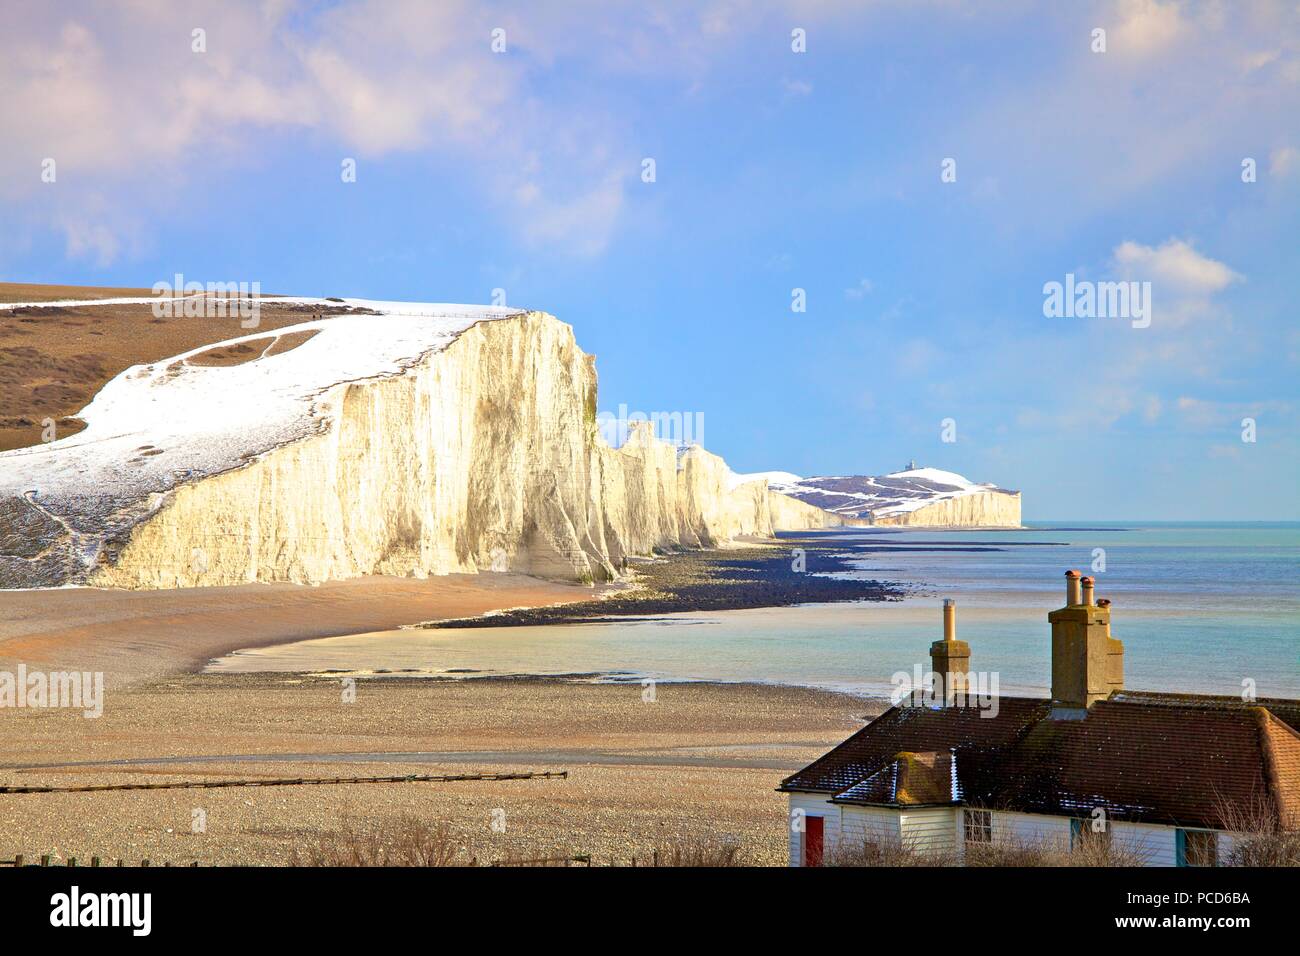 Snow on The Seven Sisters and Coastguard Cottages, Seaford Head, South Downs National Park, East Sussex, England, United Kingdom, Europe Stock Photo